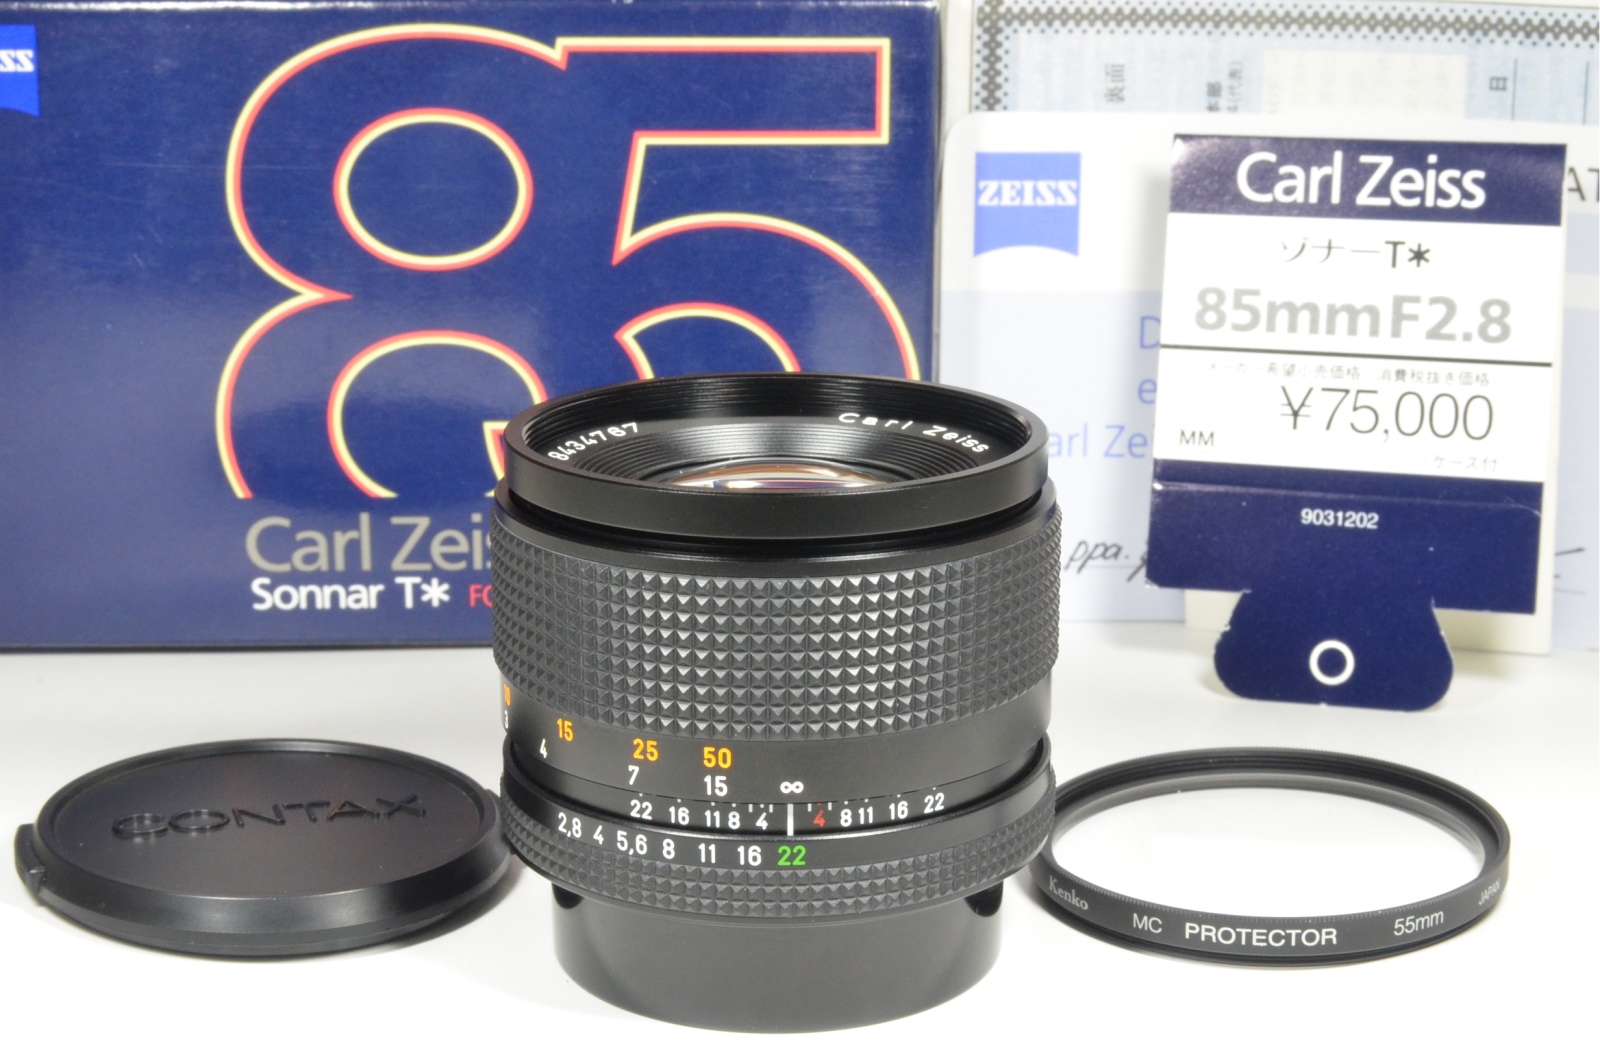 contax carl zeiss sonnar t* 85mm f2.8 mmg germany in boxed